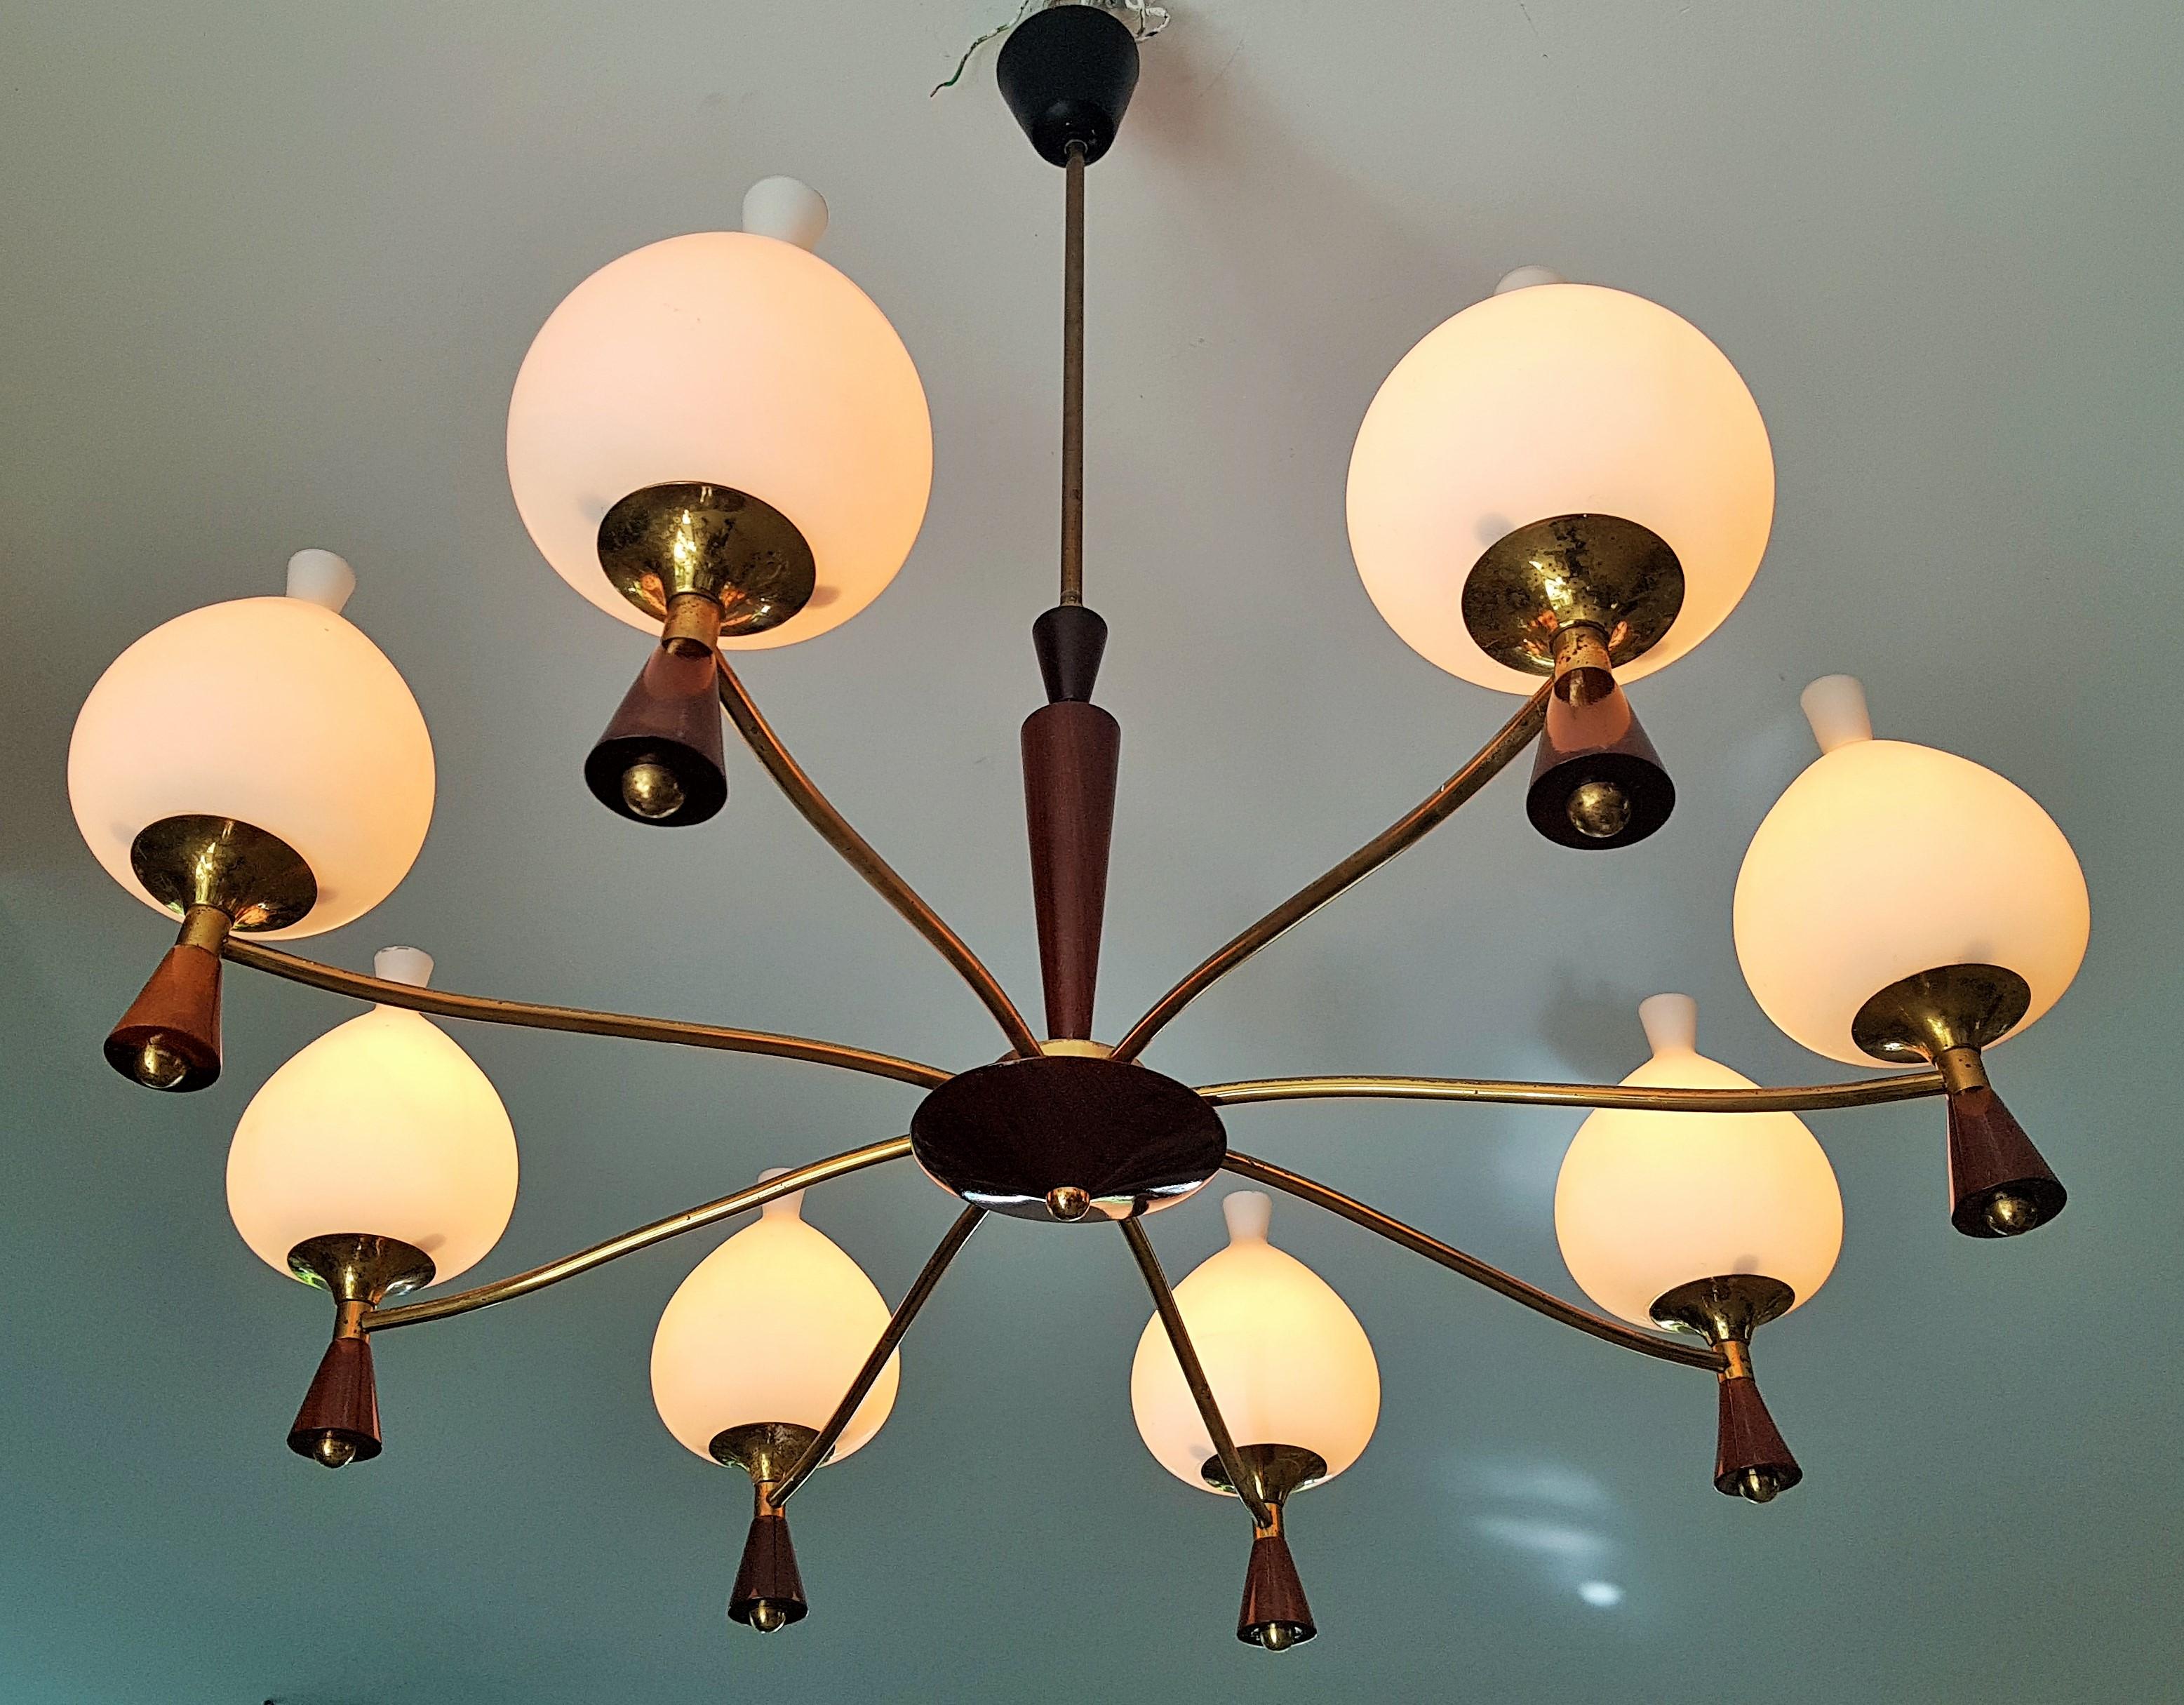 Midcentury Chandelier Style Sciolari, Brass and Wood, Italy, 1950s For Sale 2